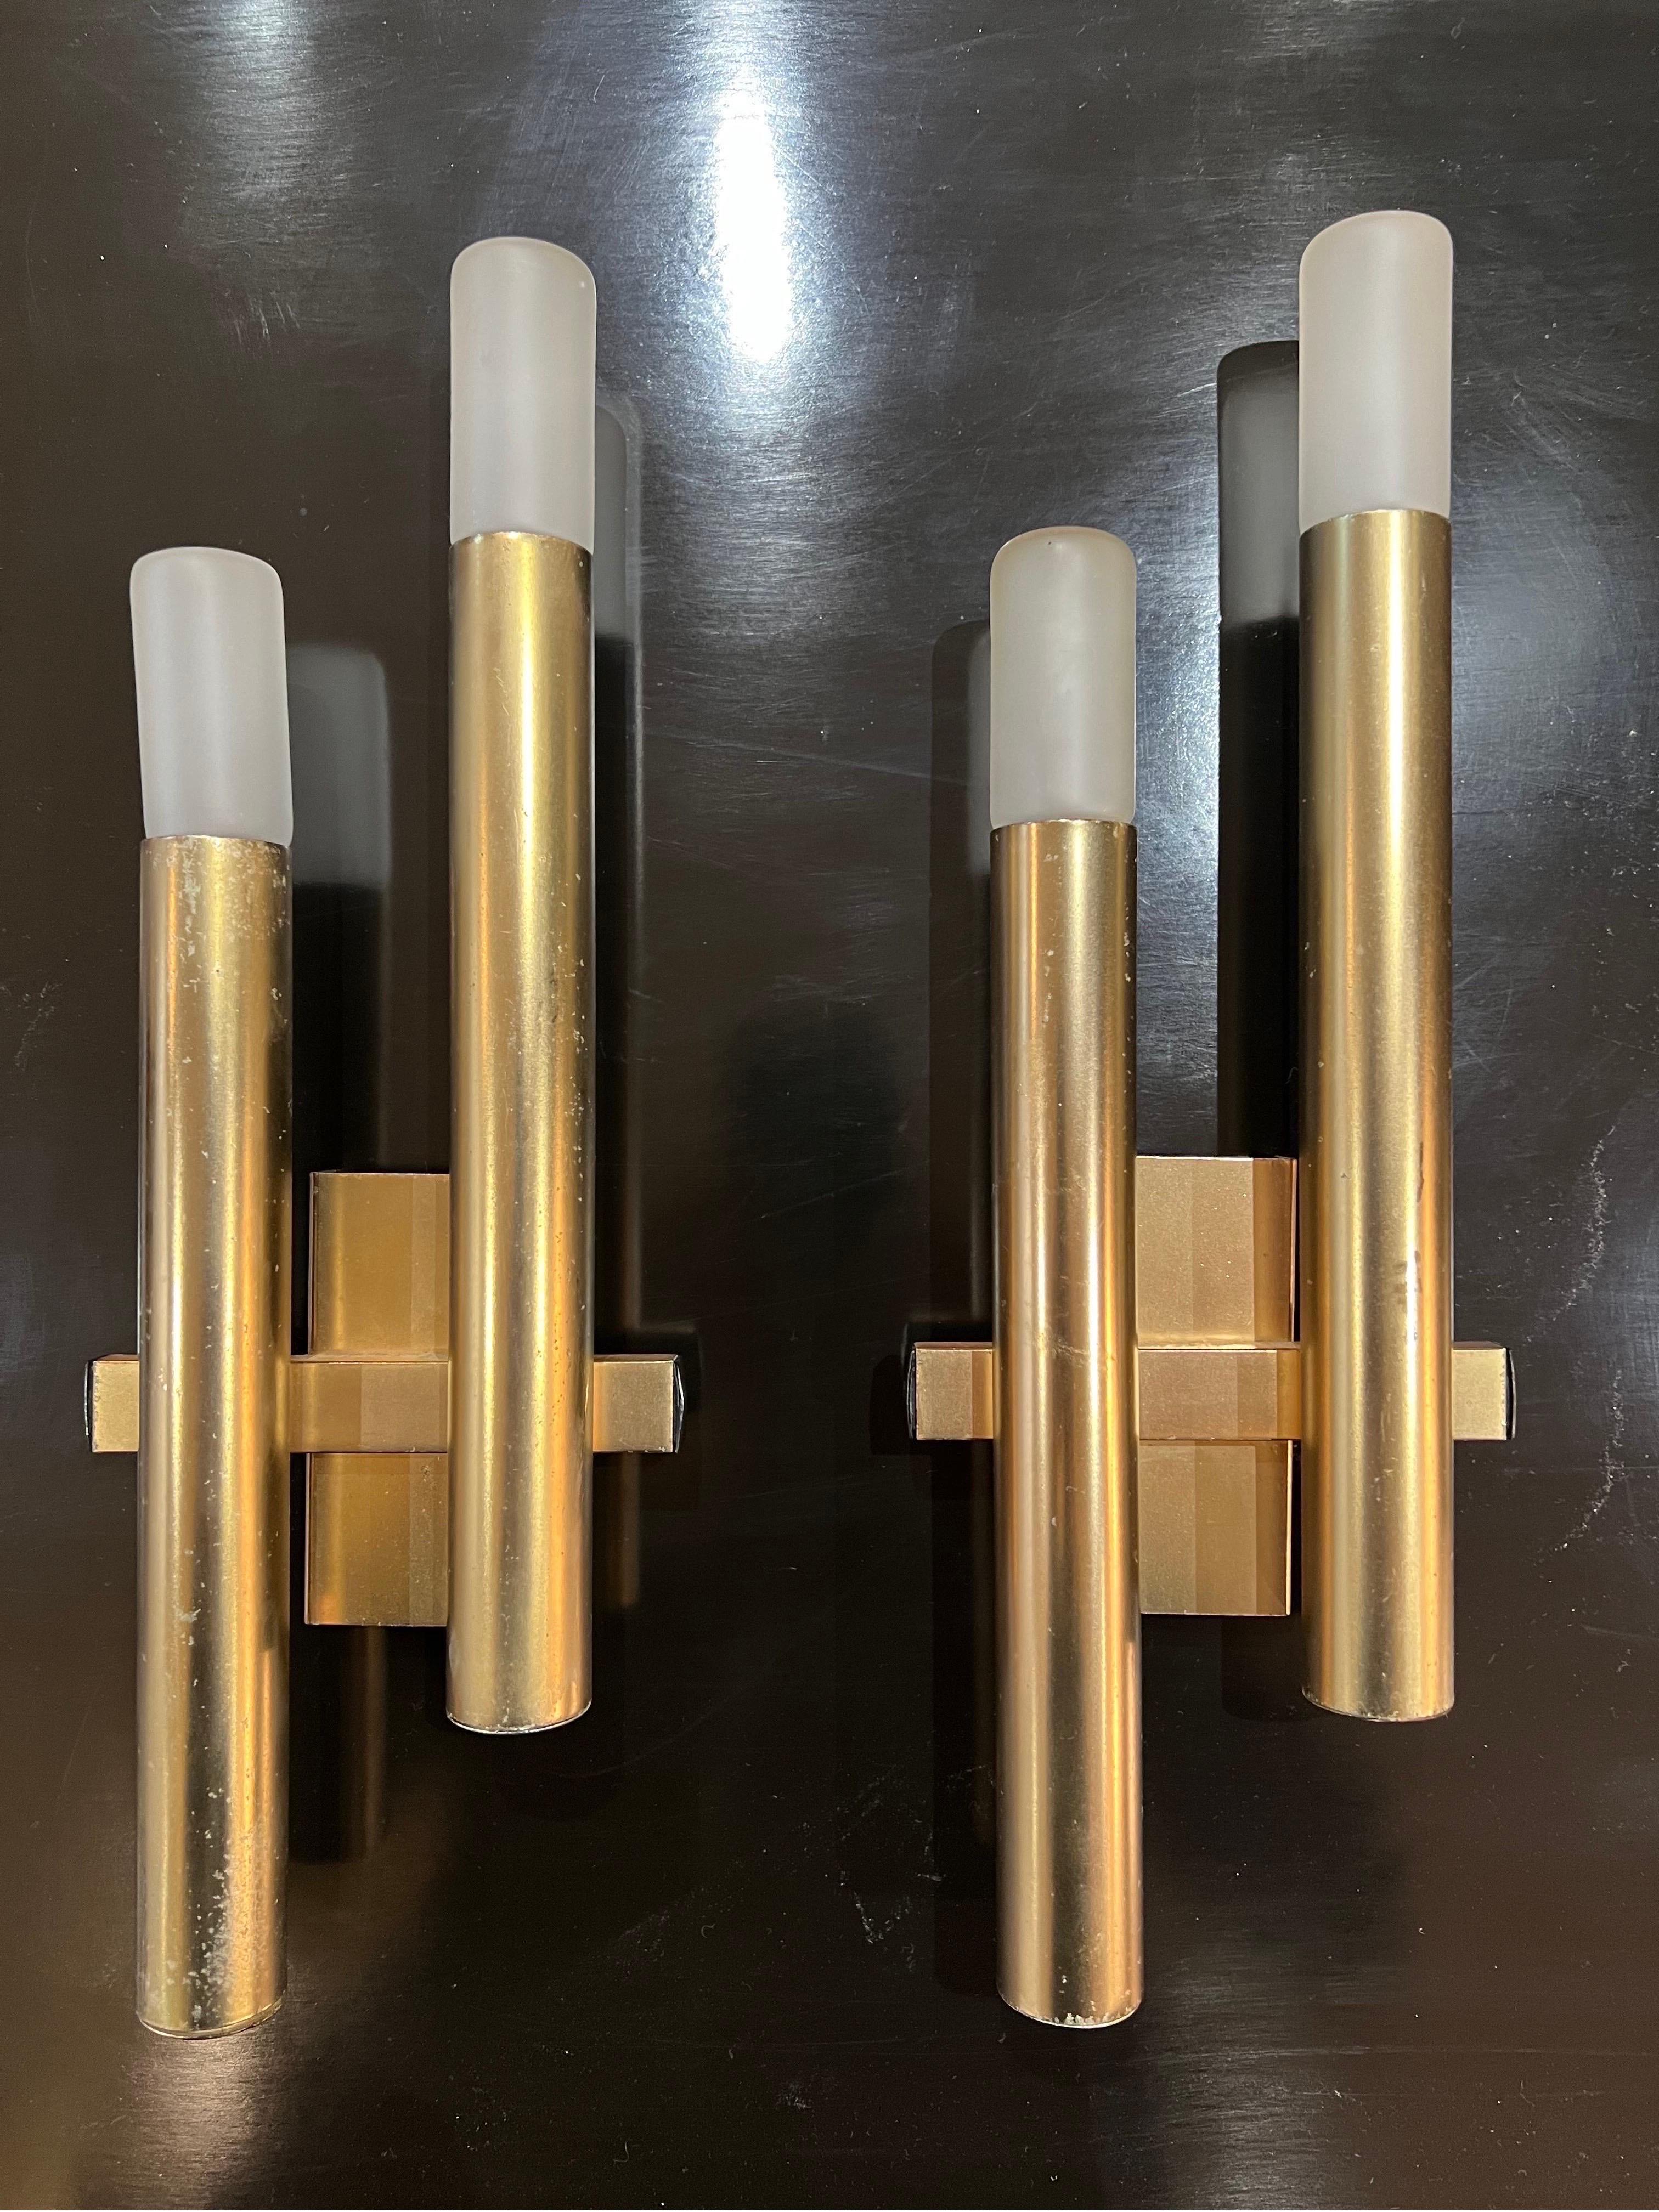 Set of 2 Stilnovo wall sconces in tubular brass with 2 bulbs each. We have an additional set of 4 with three tubes/bulbs each which can be added to the set.
This is an ideal collection of wall lamps that can be put together as a wall installation